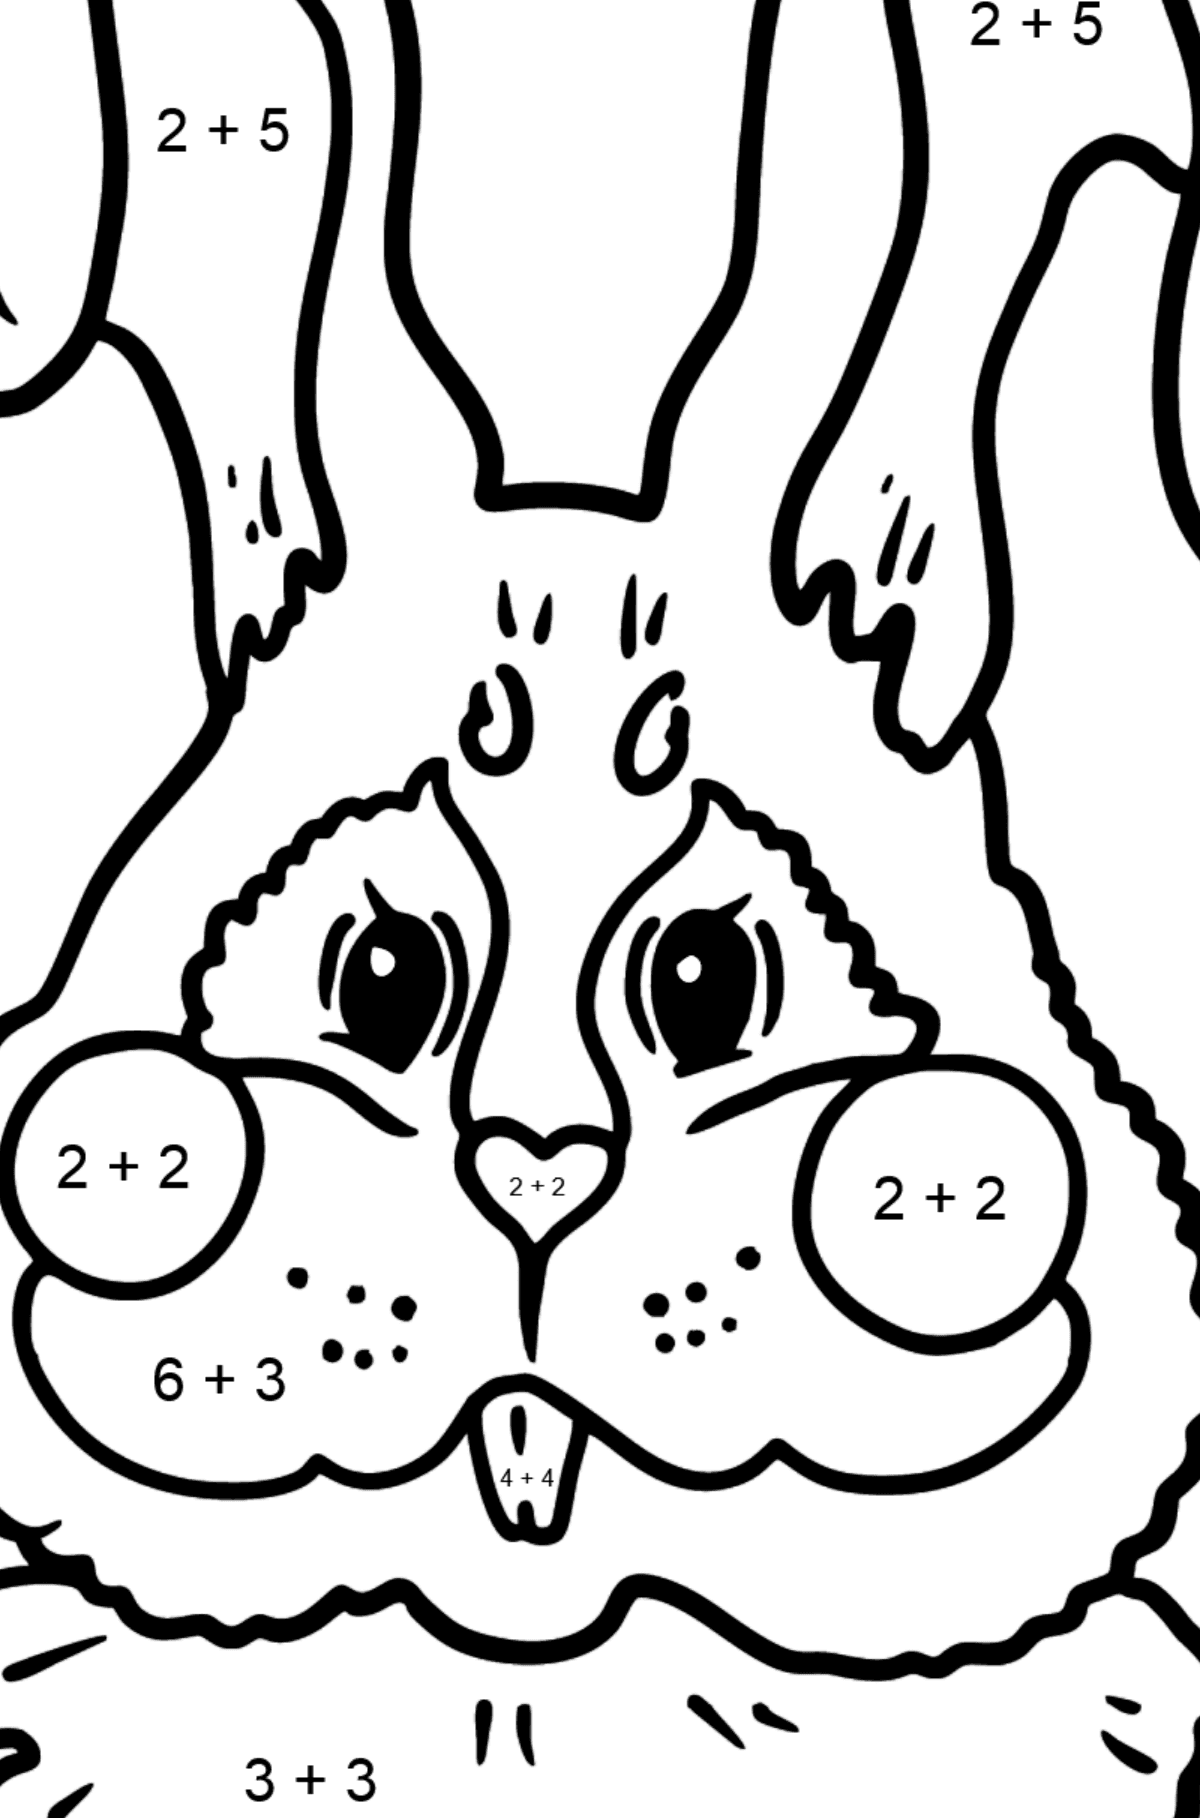 Bunny Face coloring page - Math Coloring - Addition for Kids